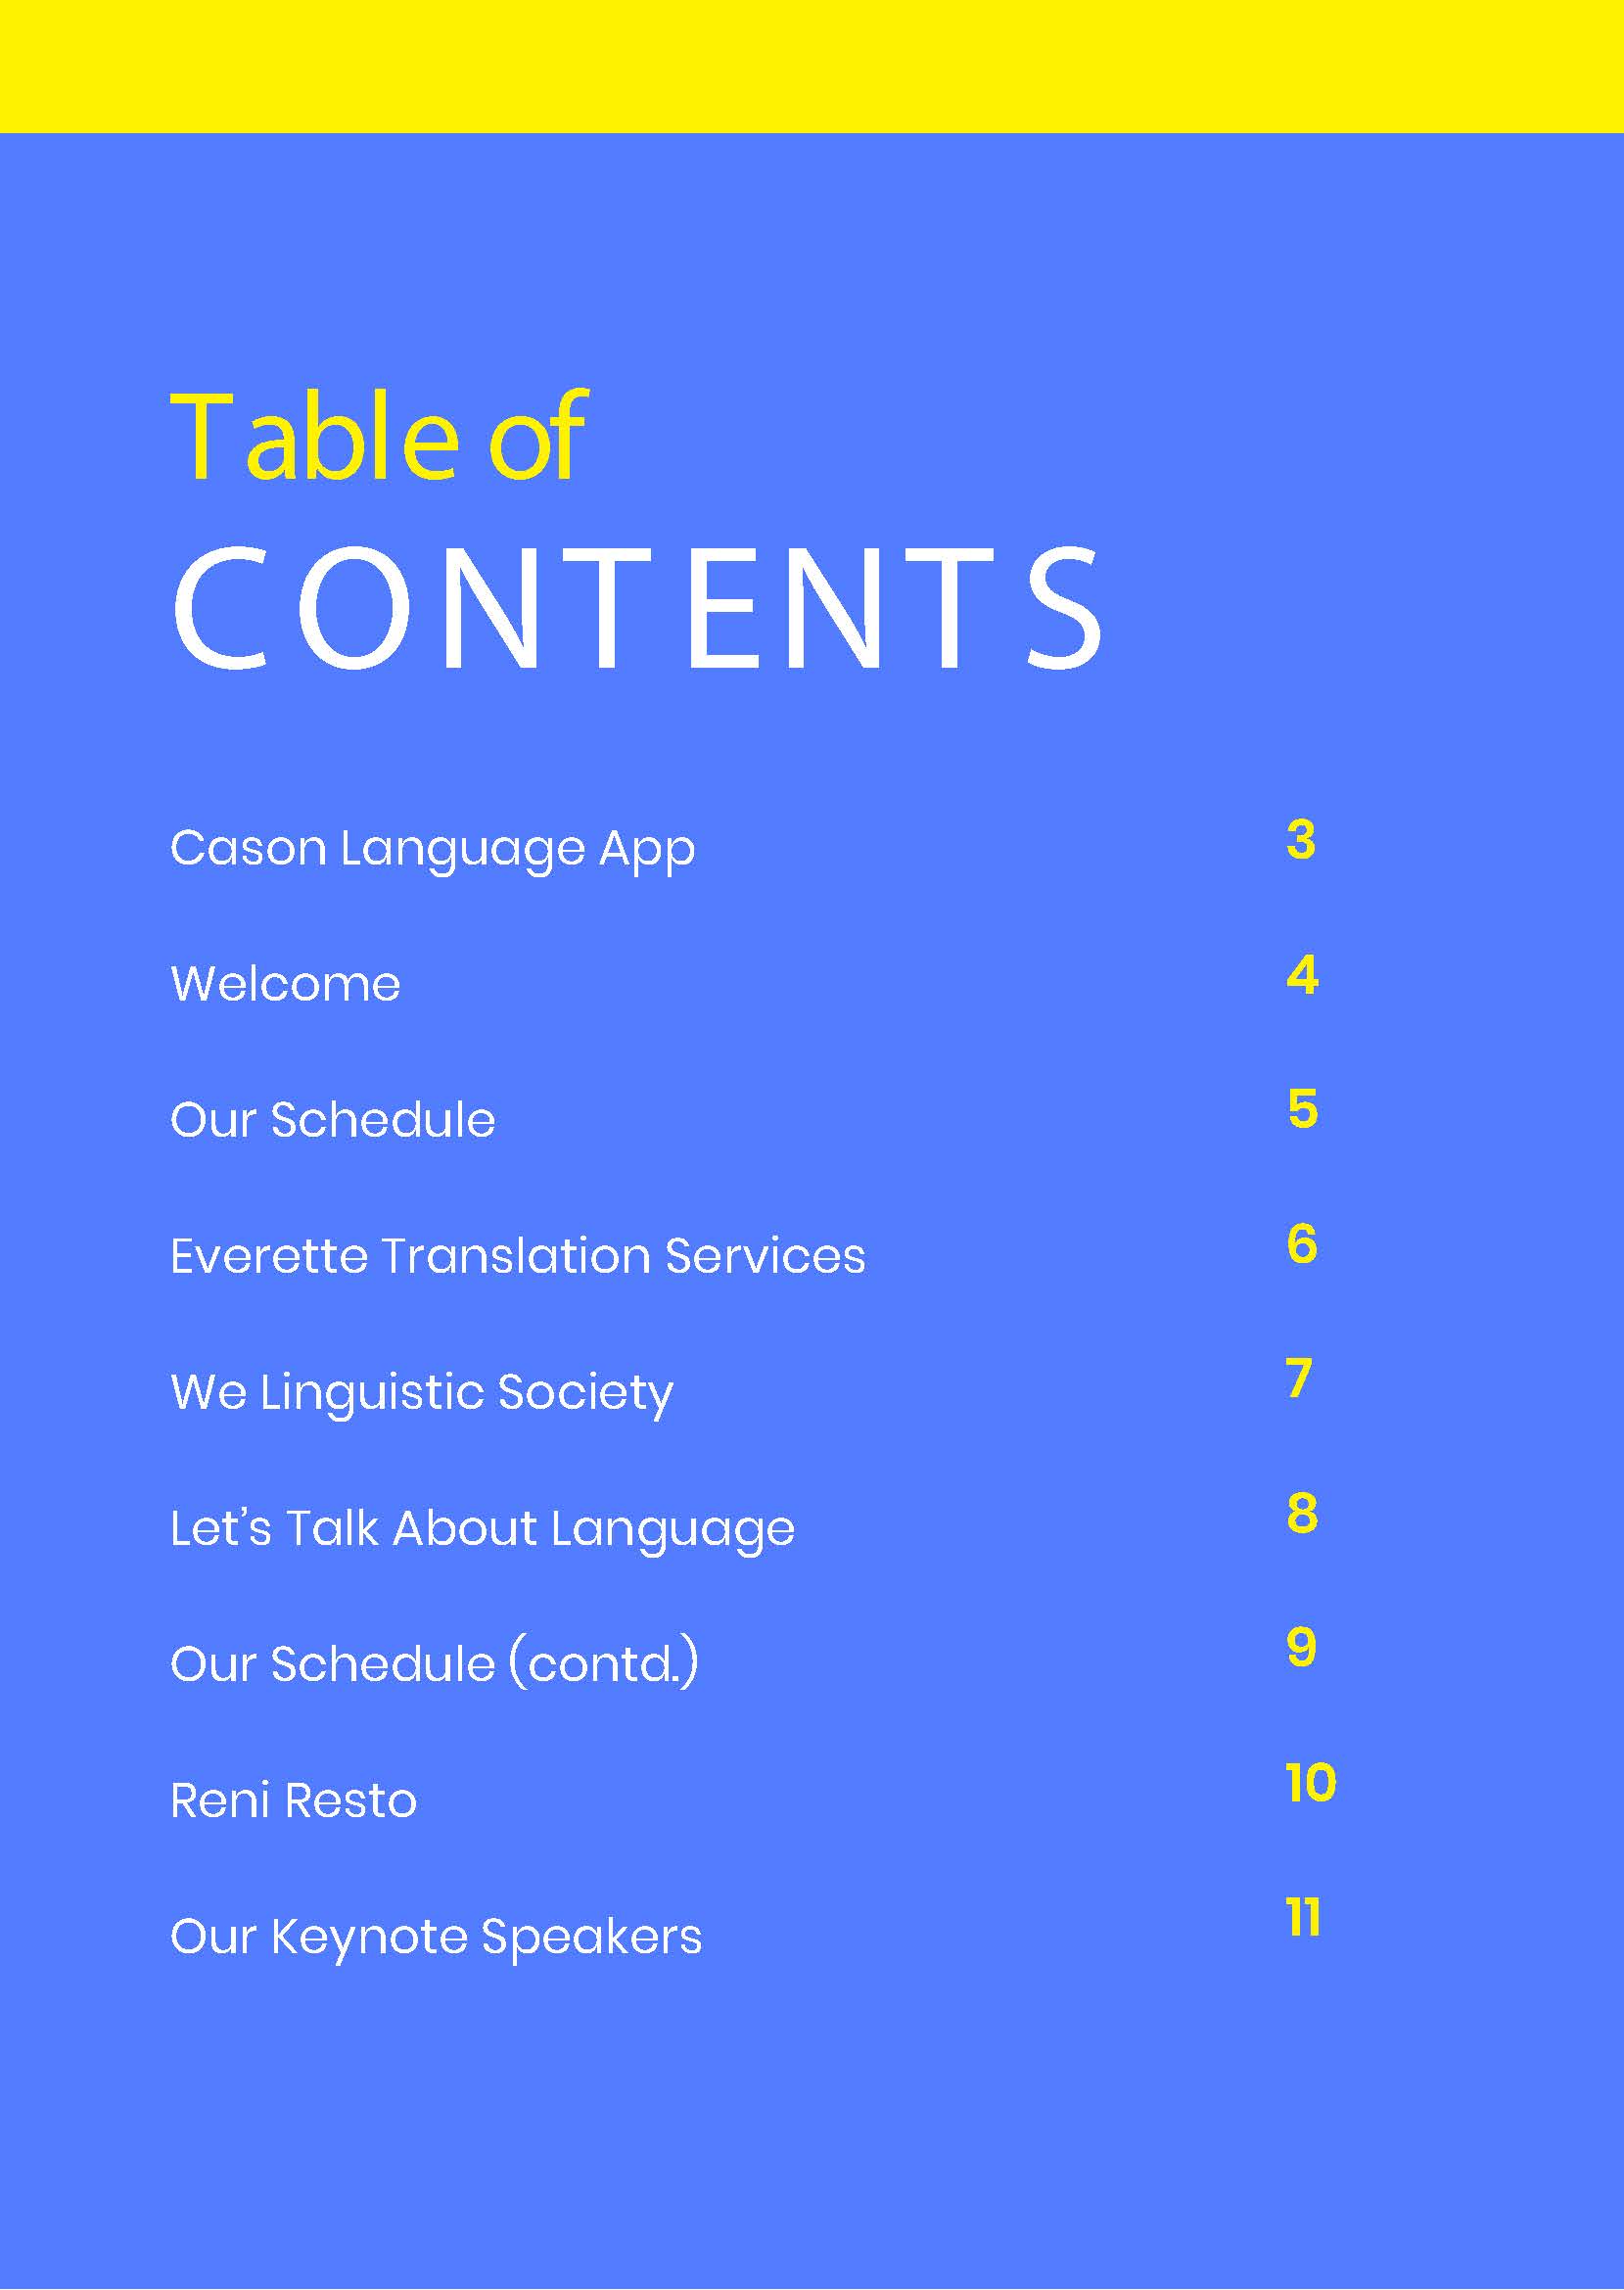 Conference Booklet Template in Google Docs Publisher Word